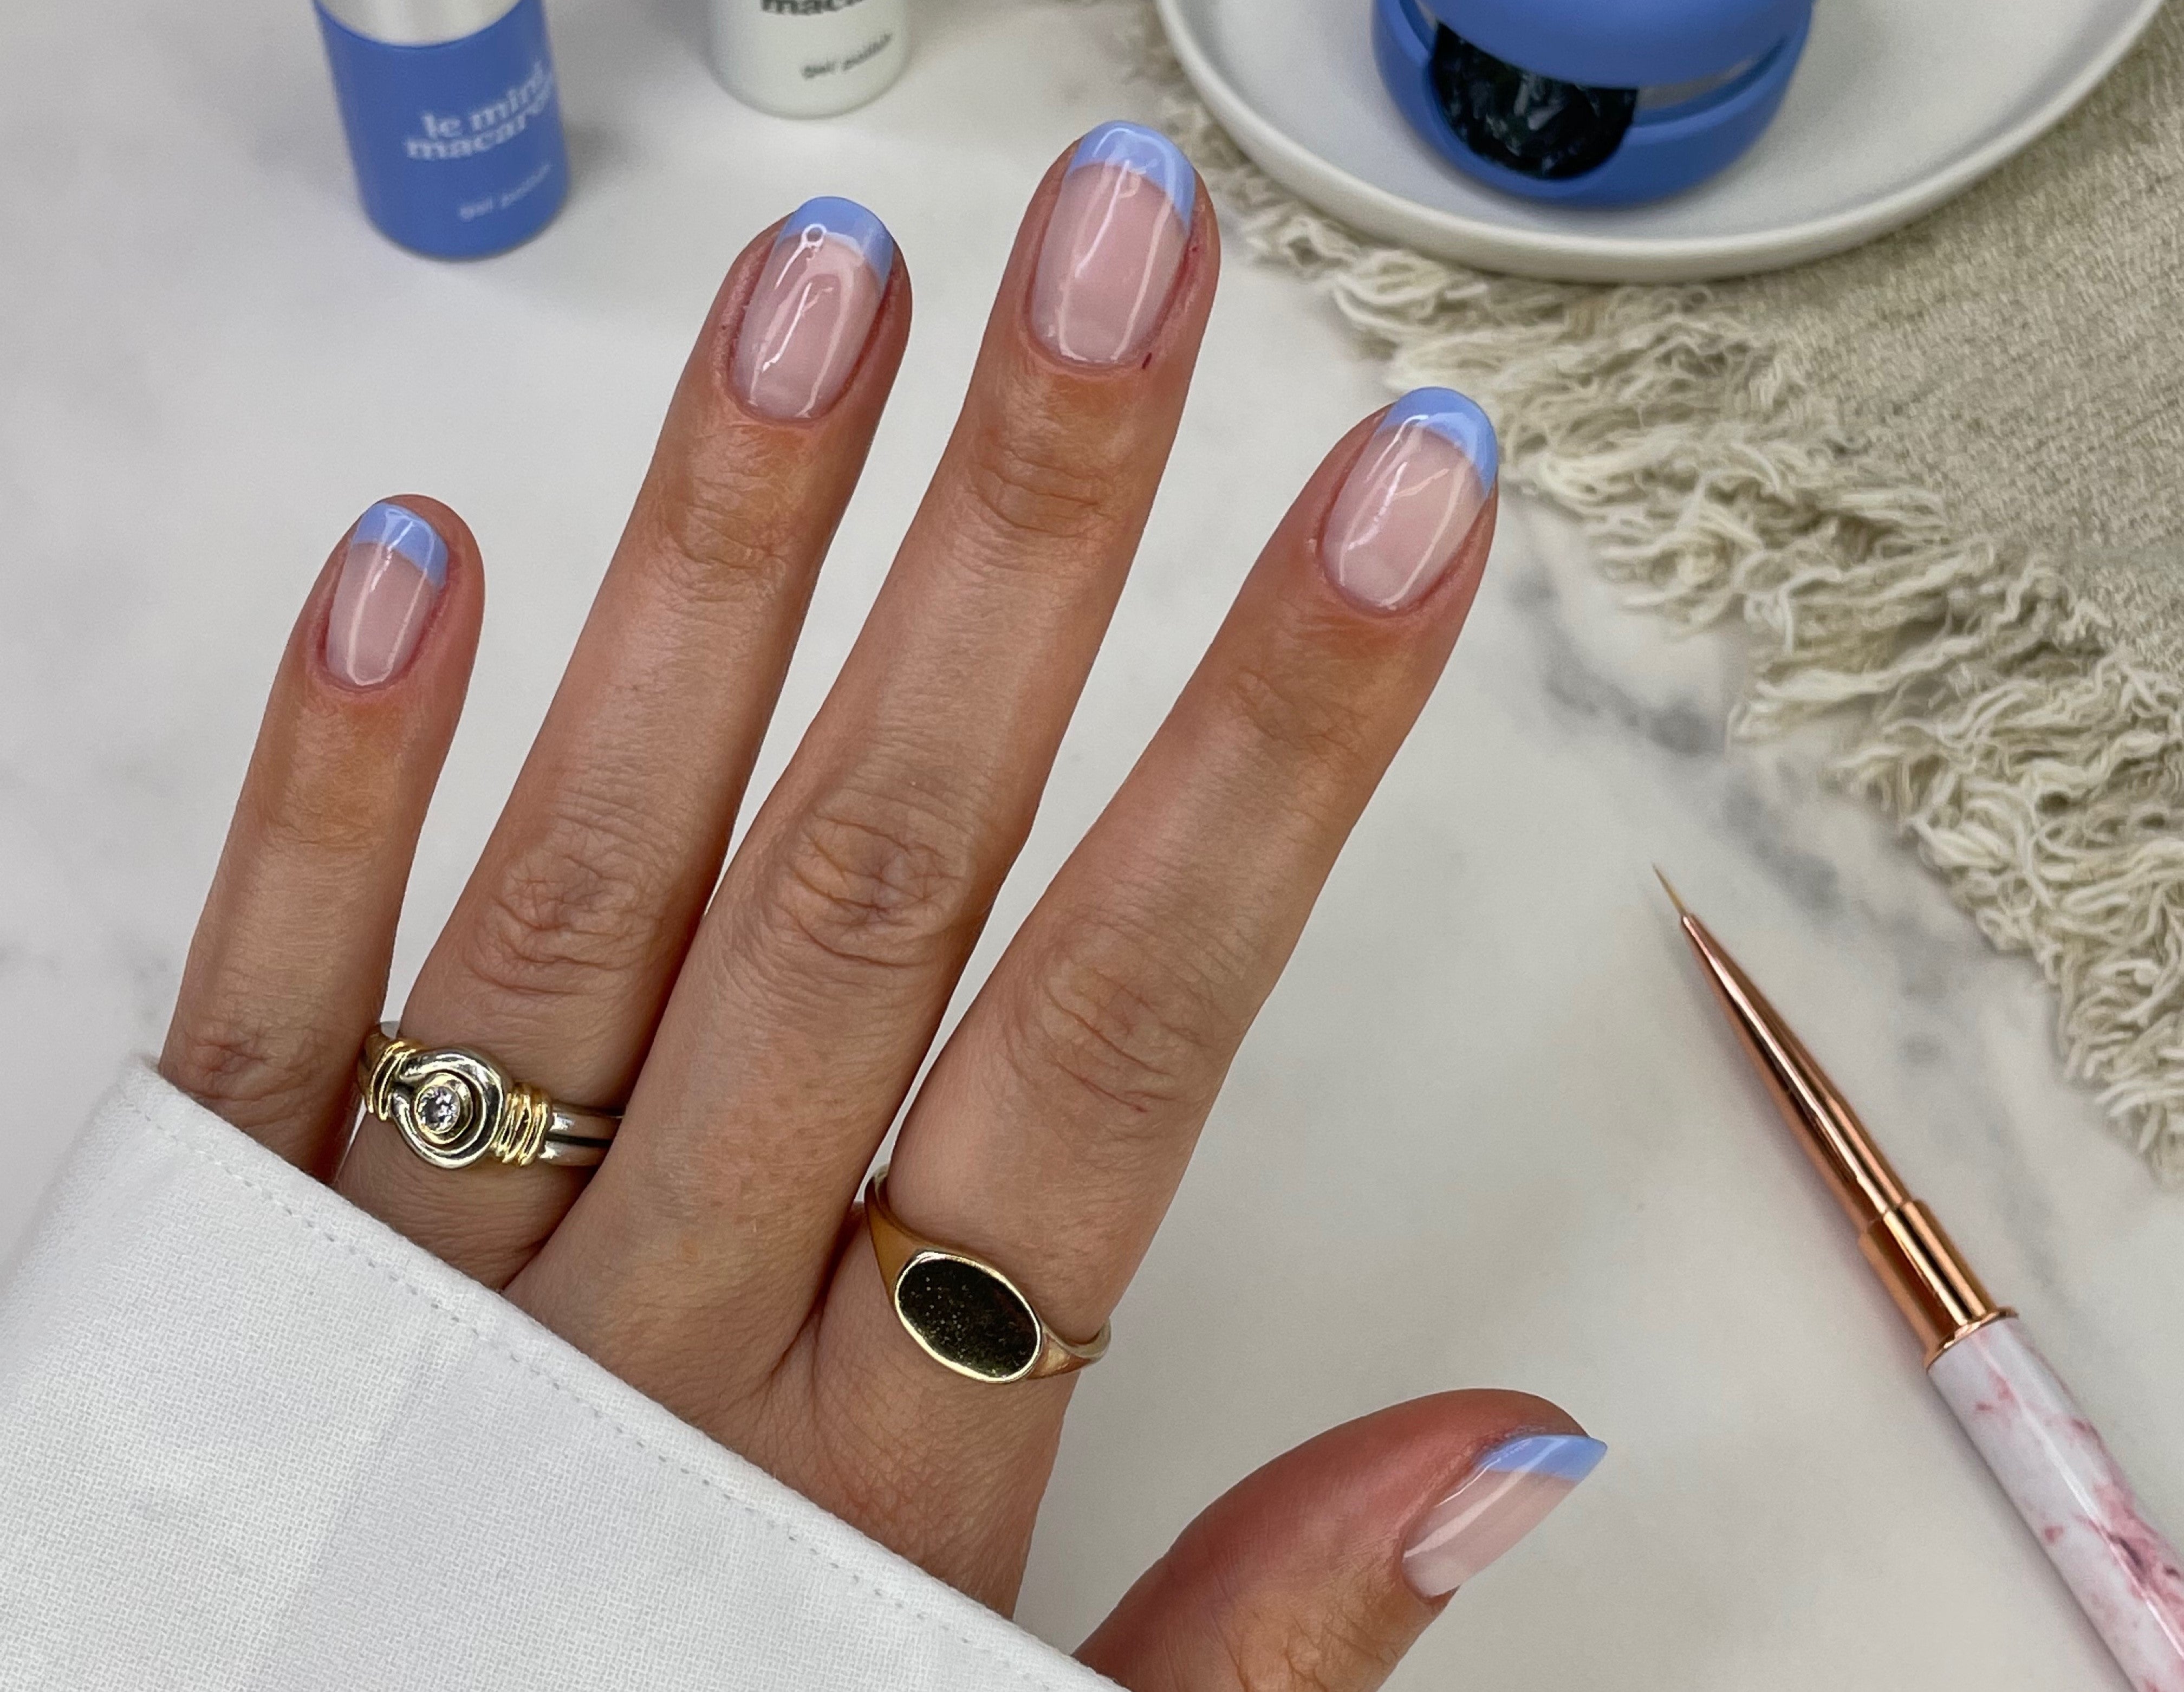 French Tips Nails: All about styles, colors, and more